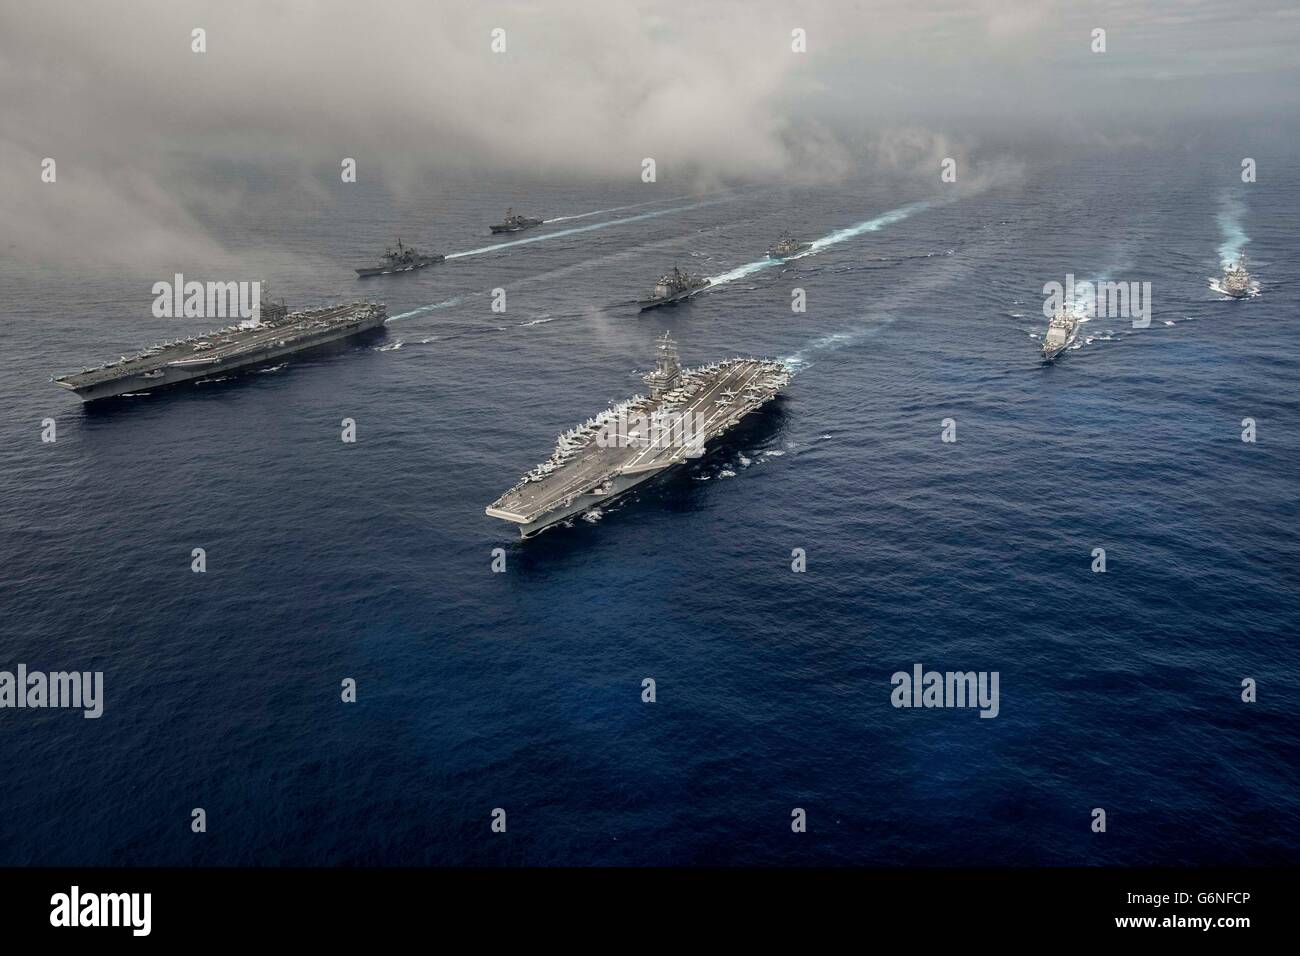 U.S Navy Nimitz-class nuclear-powered super-carrier USS John C. Stennis, left, and USS Ronald Reagan, right, steam in formation during dual operations June 18, 2016 in the Philippine Sea. Stock Photo